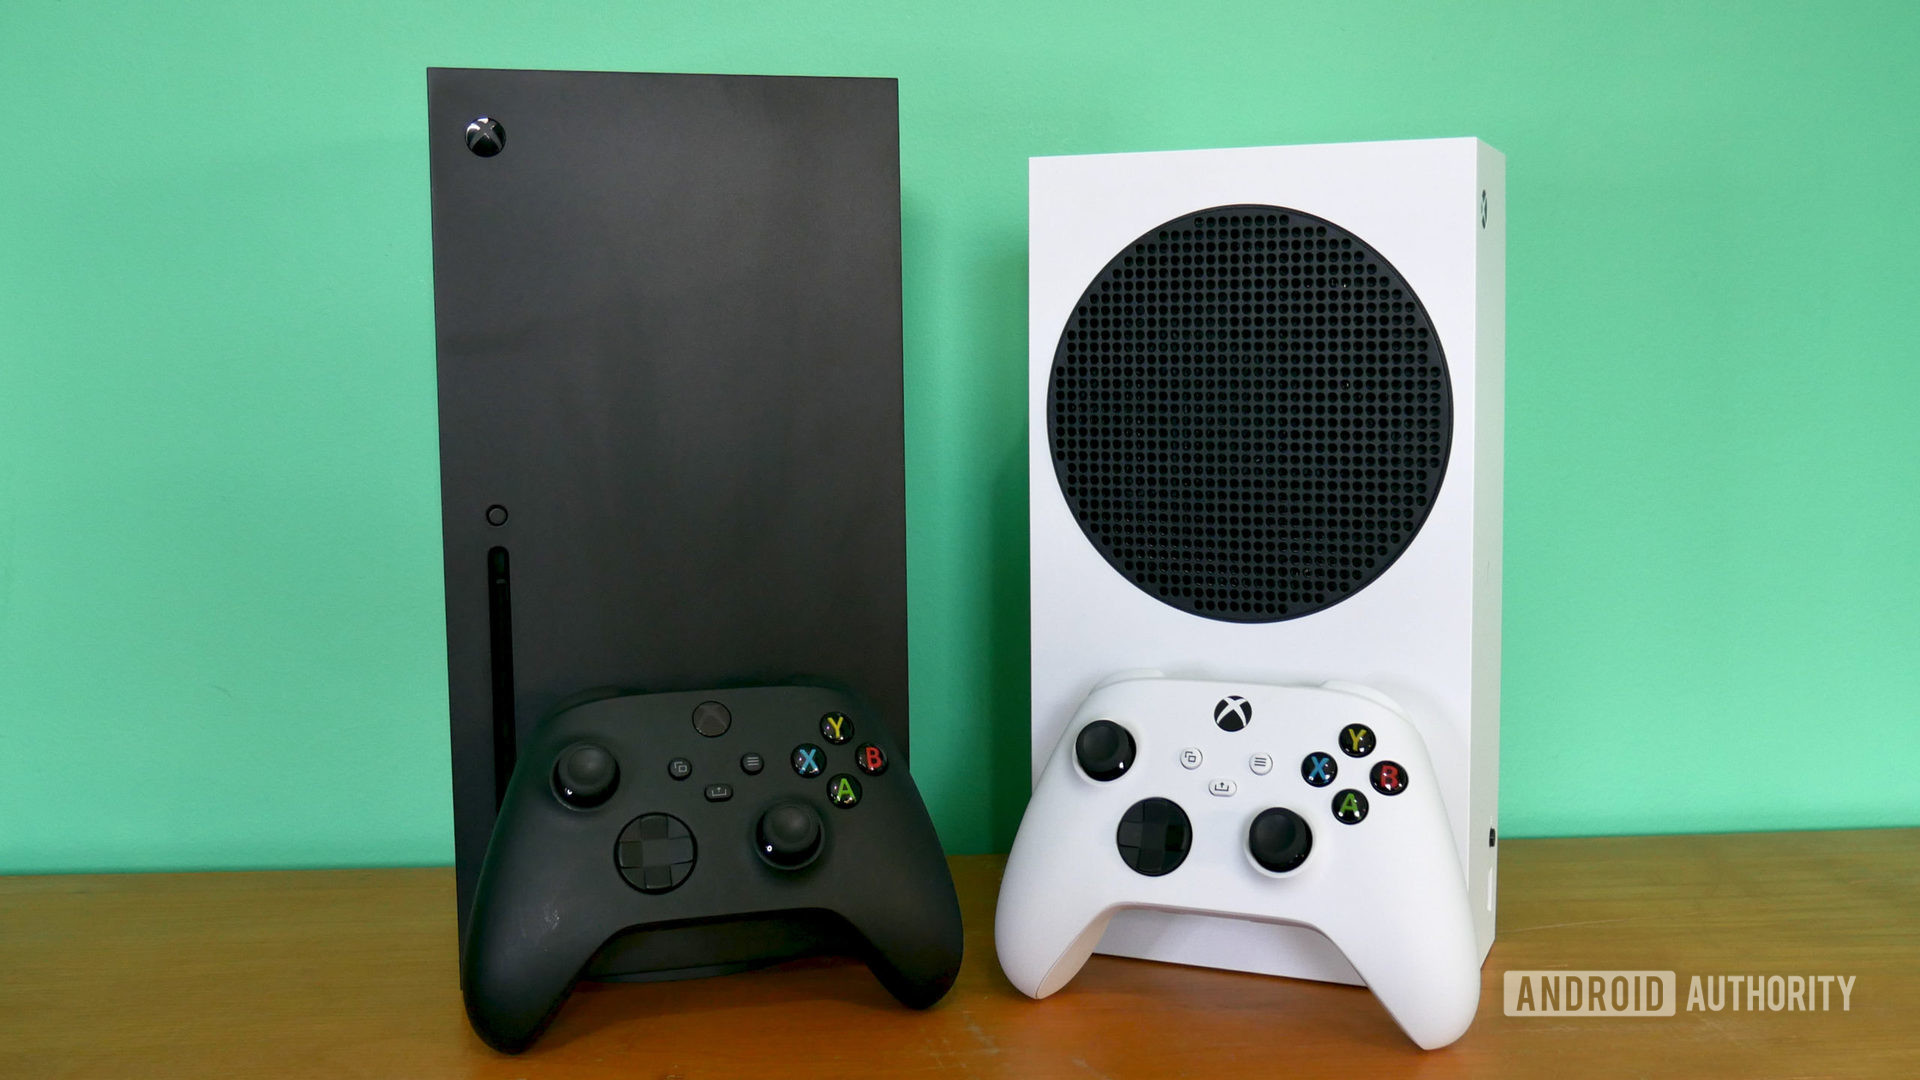 Xbox Series X vs Series S front views with controllers.